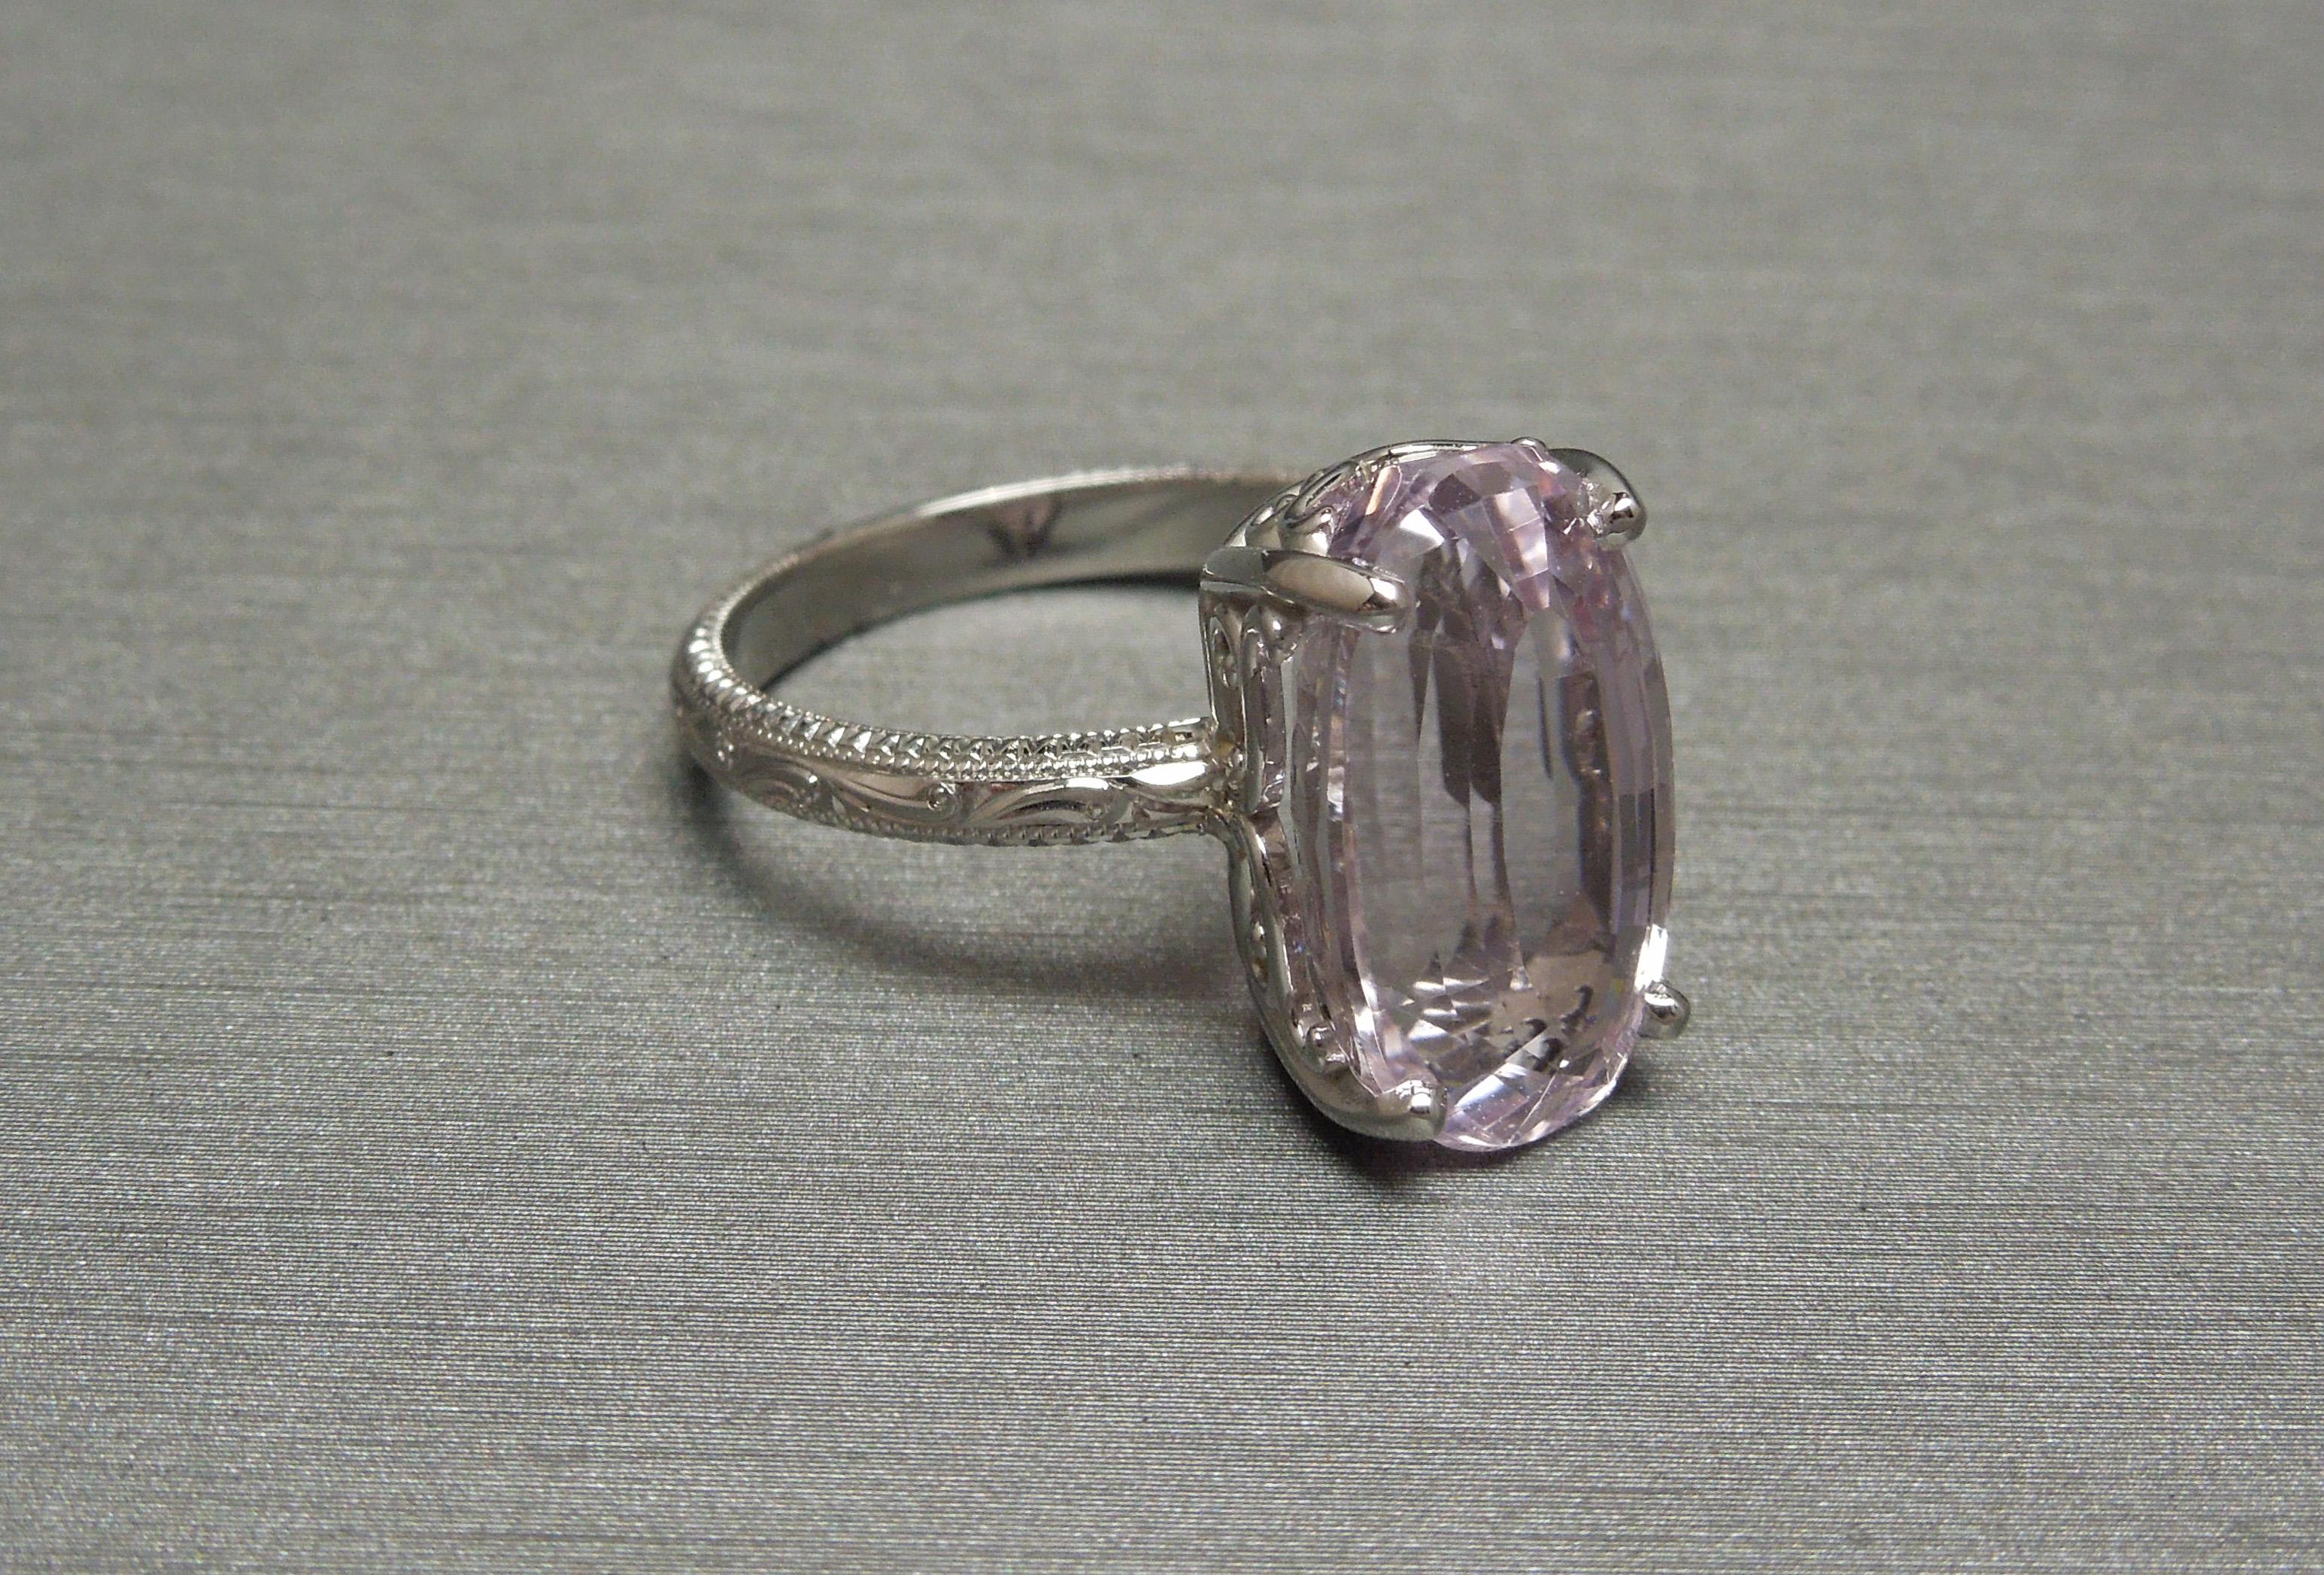 In a Classic Edwardian inspired design solitaire, featuring a 8.70 carat Elongated Oval cut Natural Brilliant Kunzite measuring 15.7mm x 9.2mm x 7.3mm. Securely set in a four-prong Filigree setting. Band accented with intricately detailed Hand